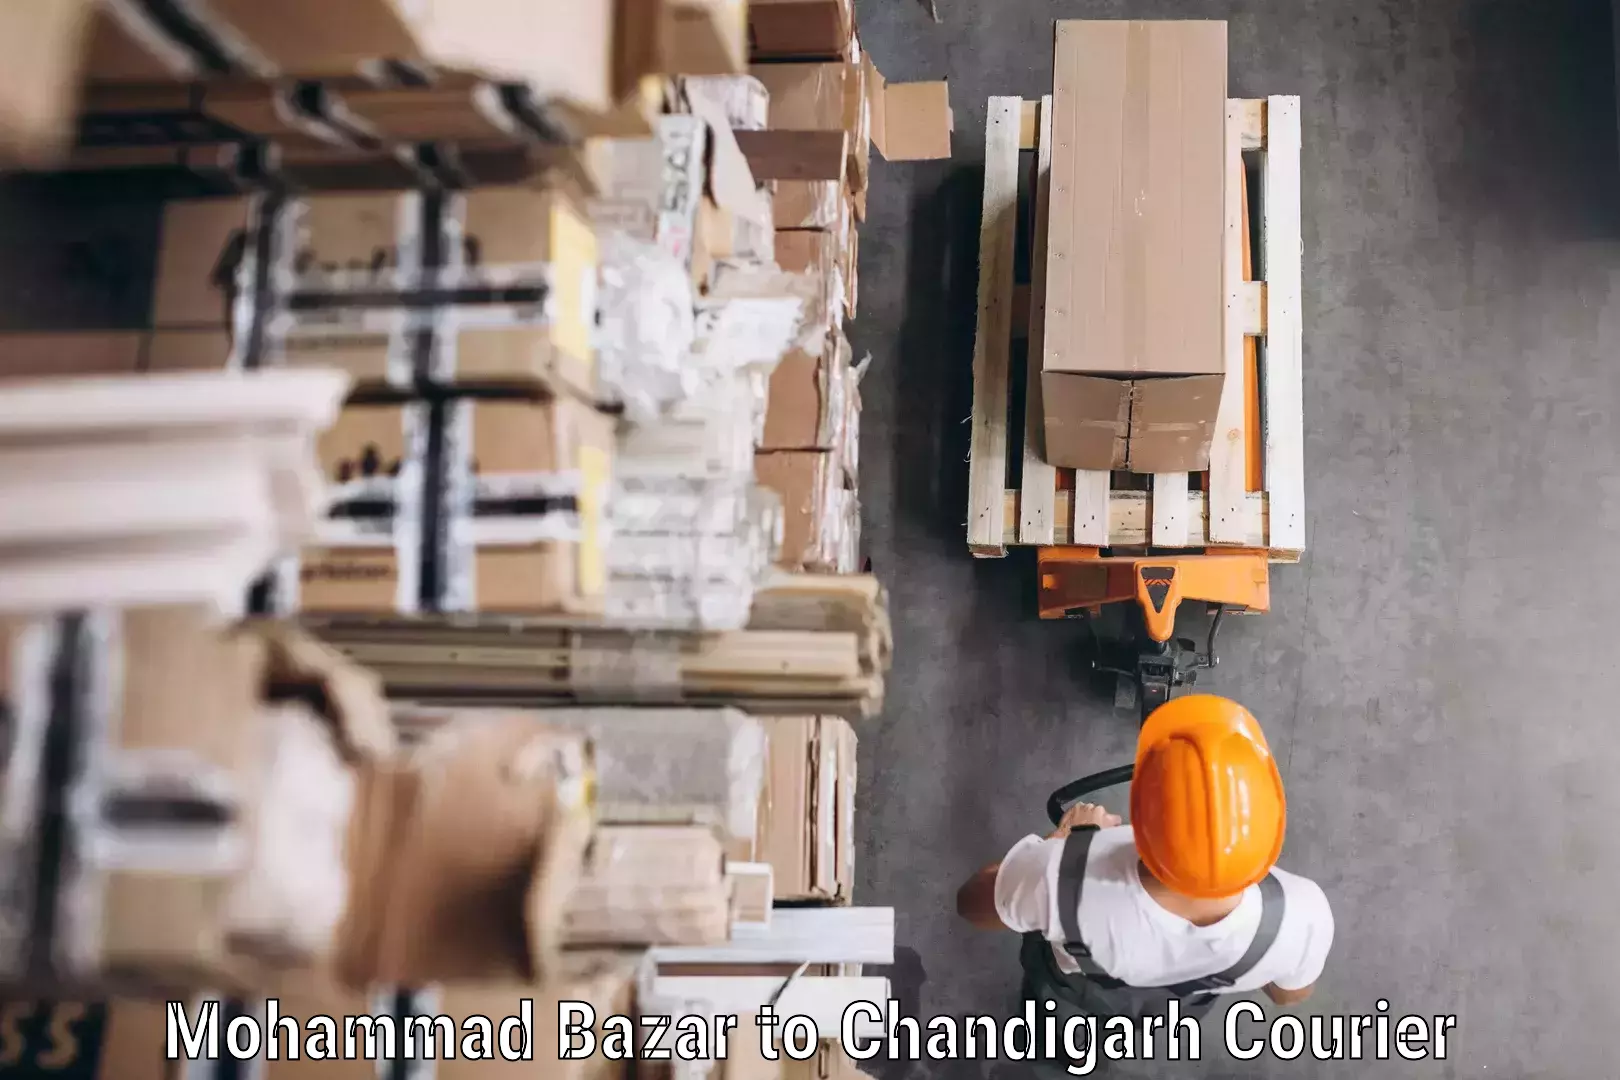 Courier service efficiency Mohammad Bazar to Chandigarh